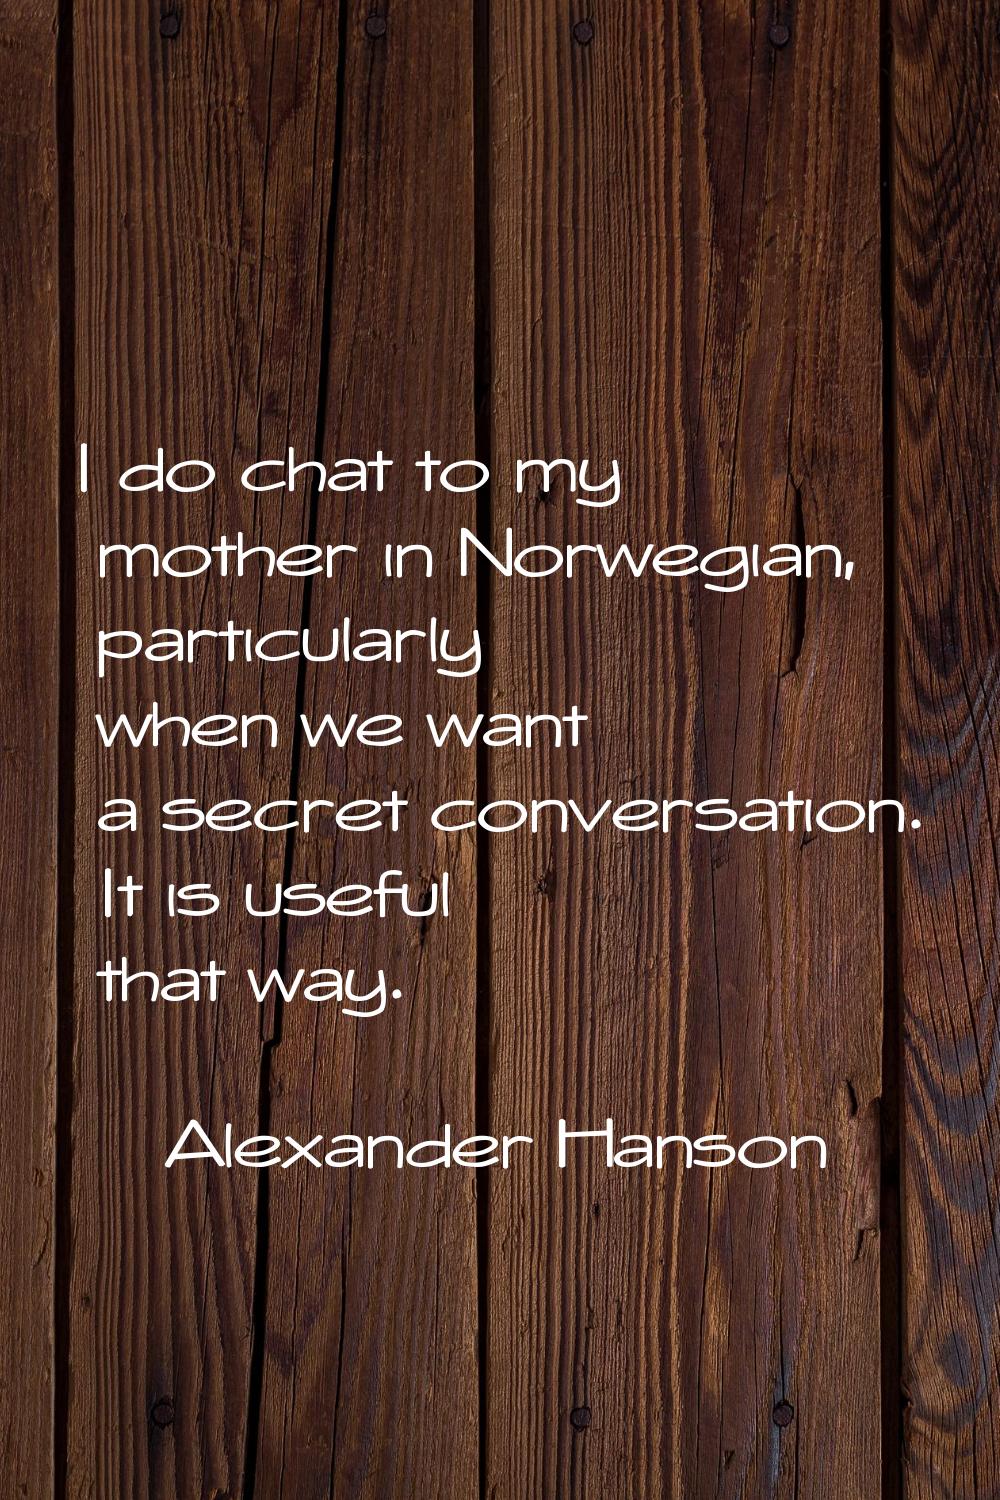 I do chat to my mother in Norwegian, particularly when we want a secret conversation. It is useful 